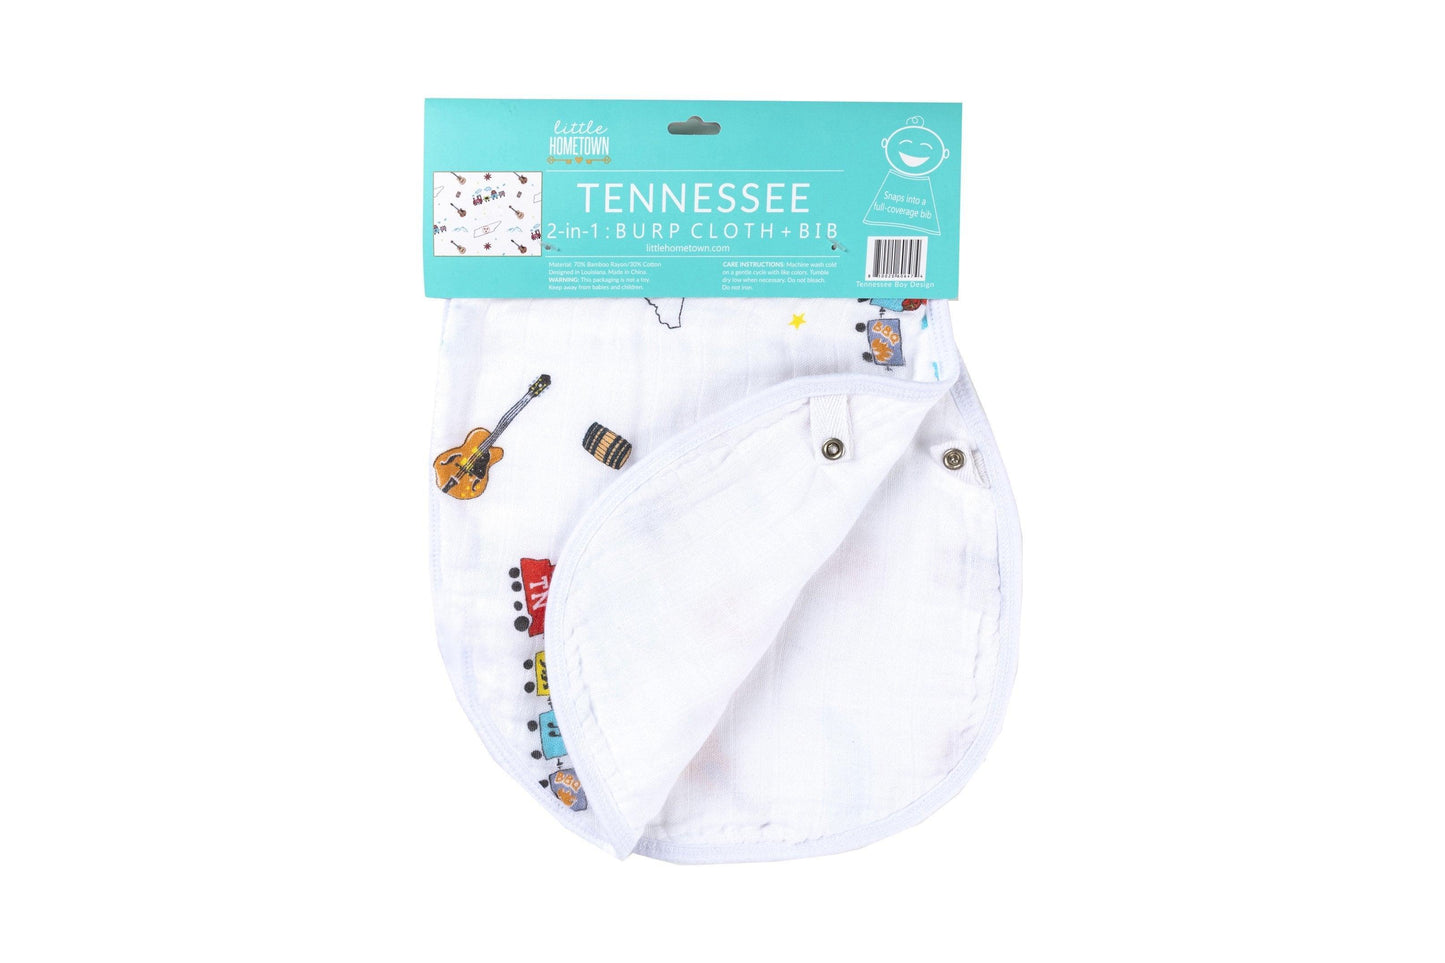 Tennessee-themed baby bib and burp cloth set featuring state symbols and "Tennessee Baby" text in vibrant colors.